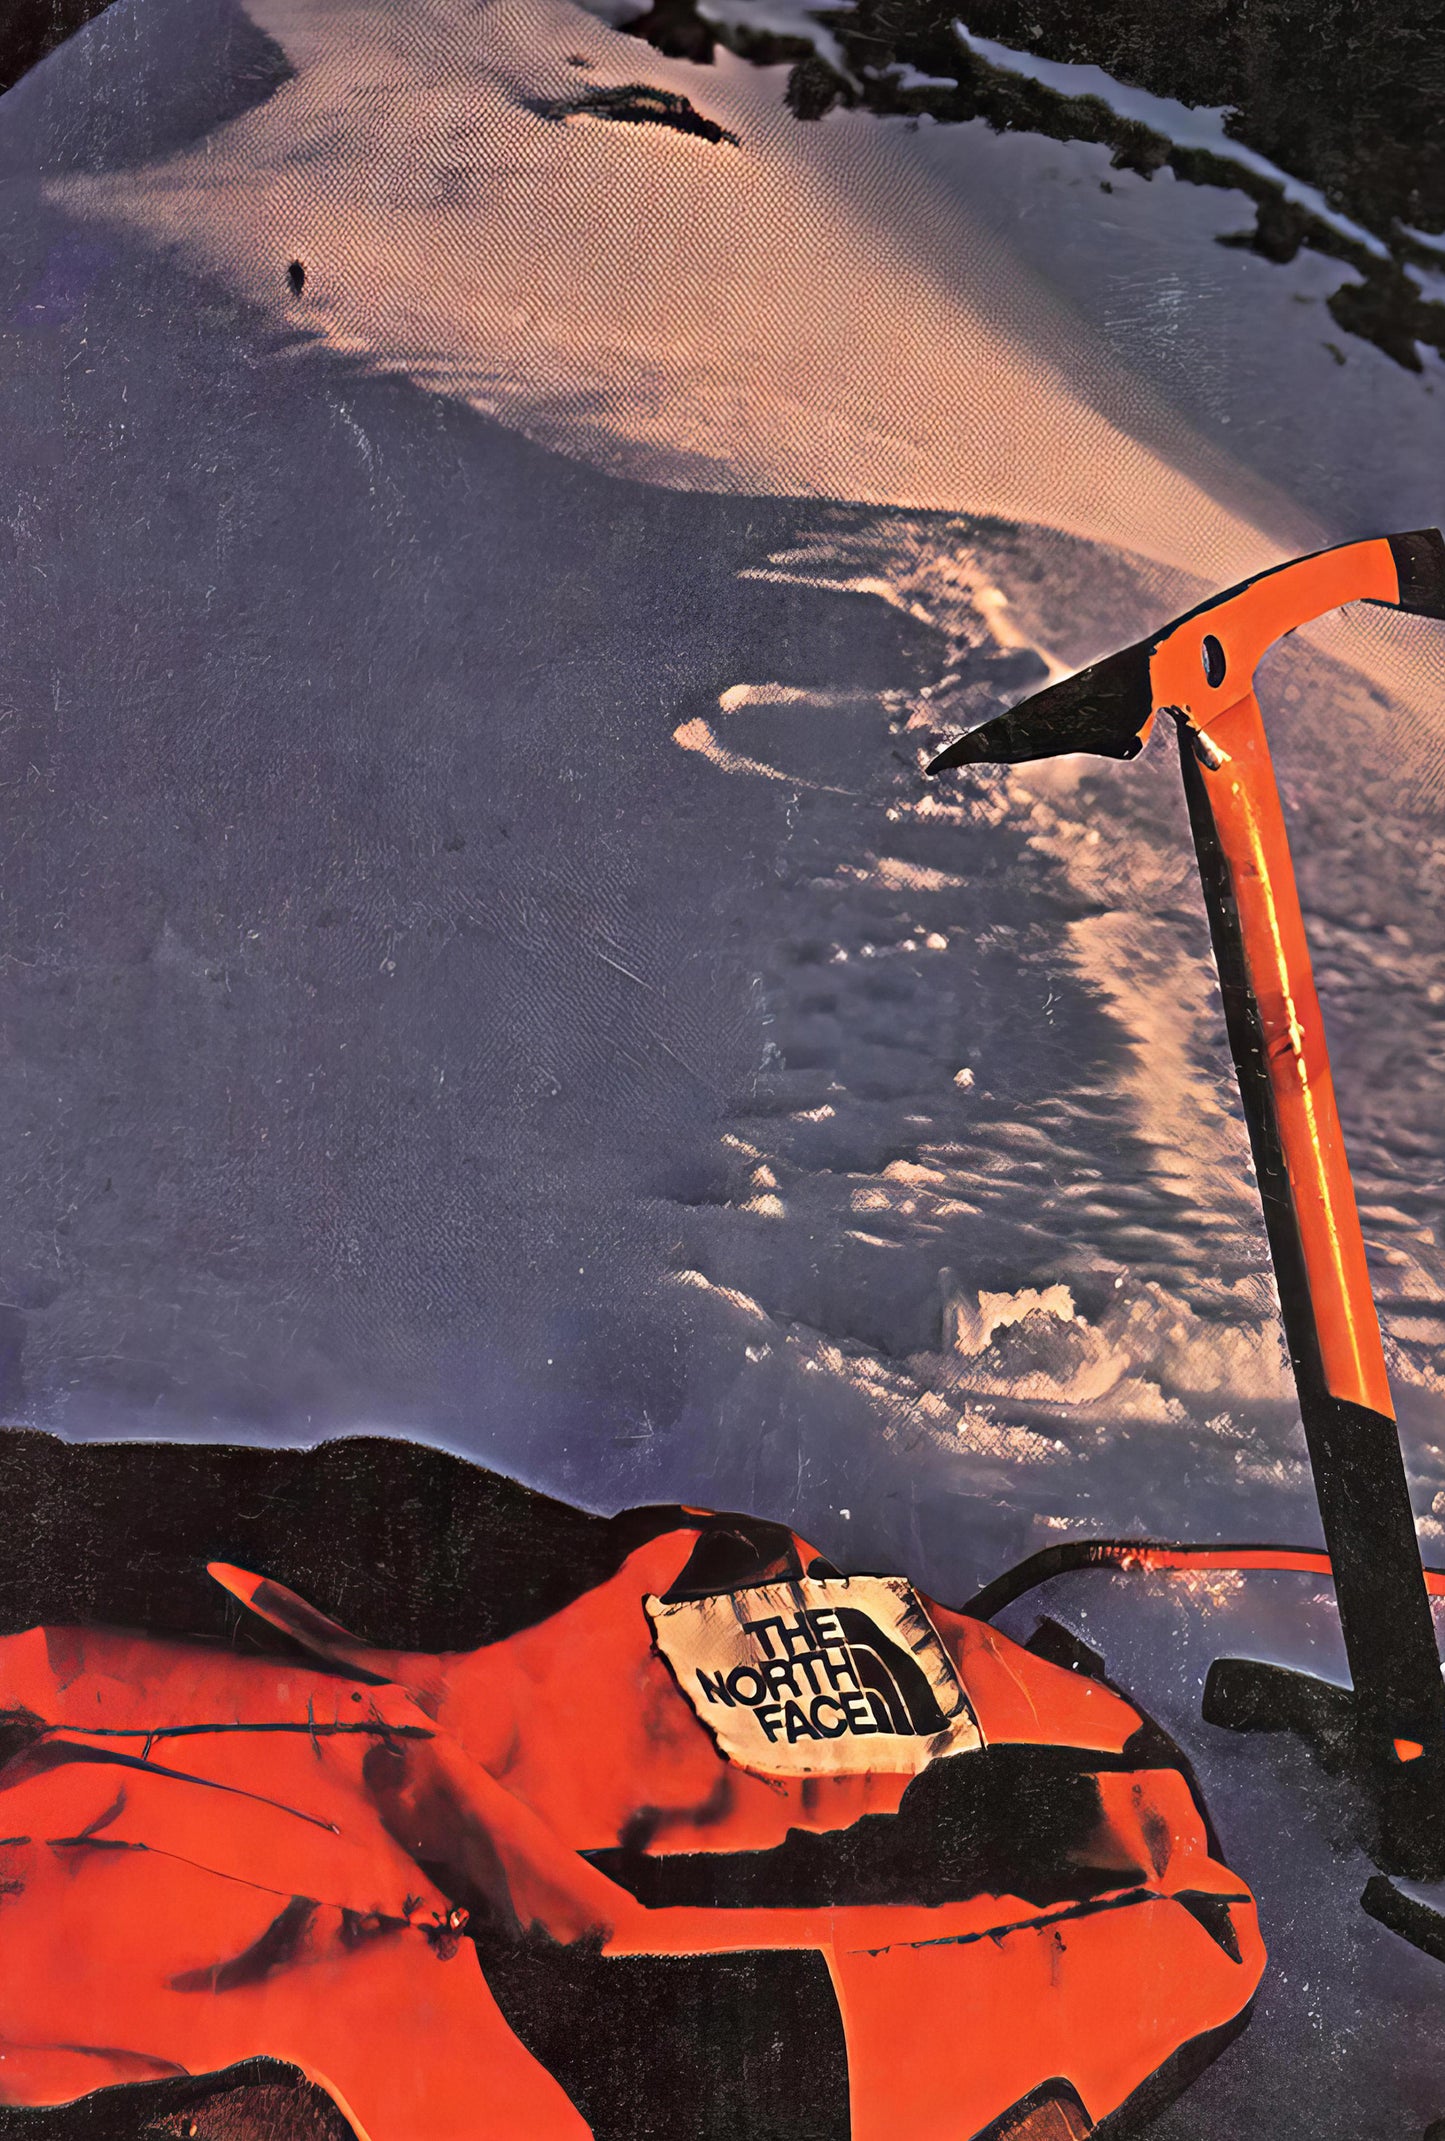 The North Face Poster